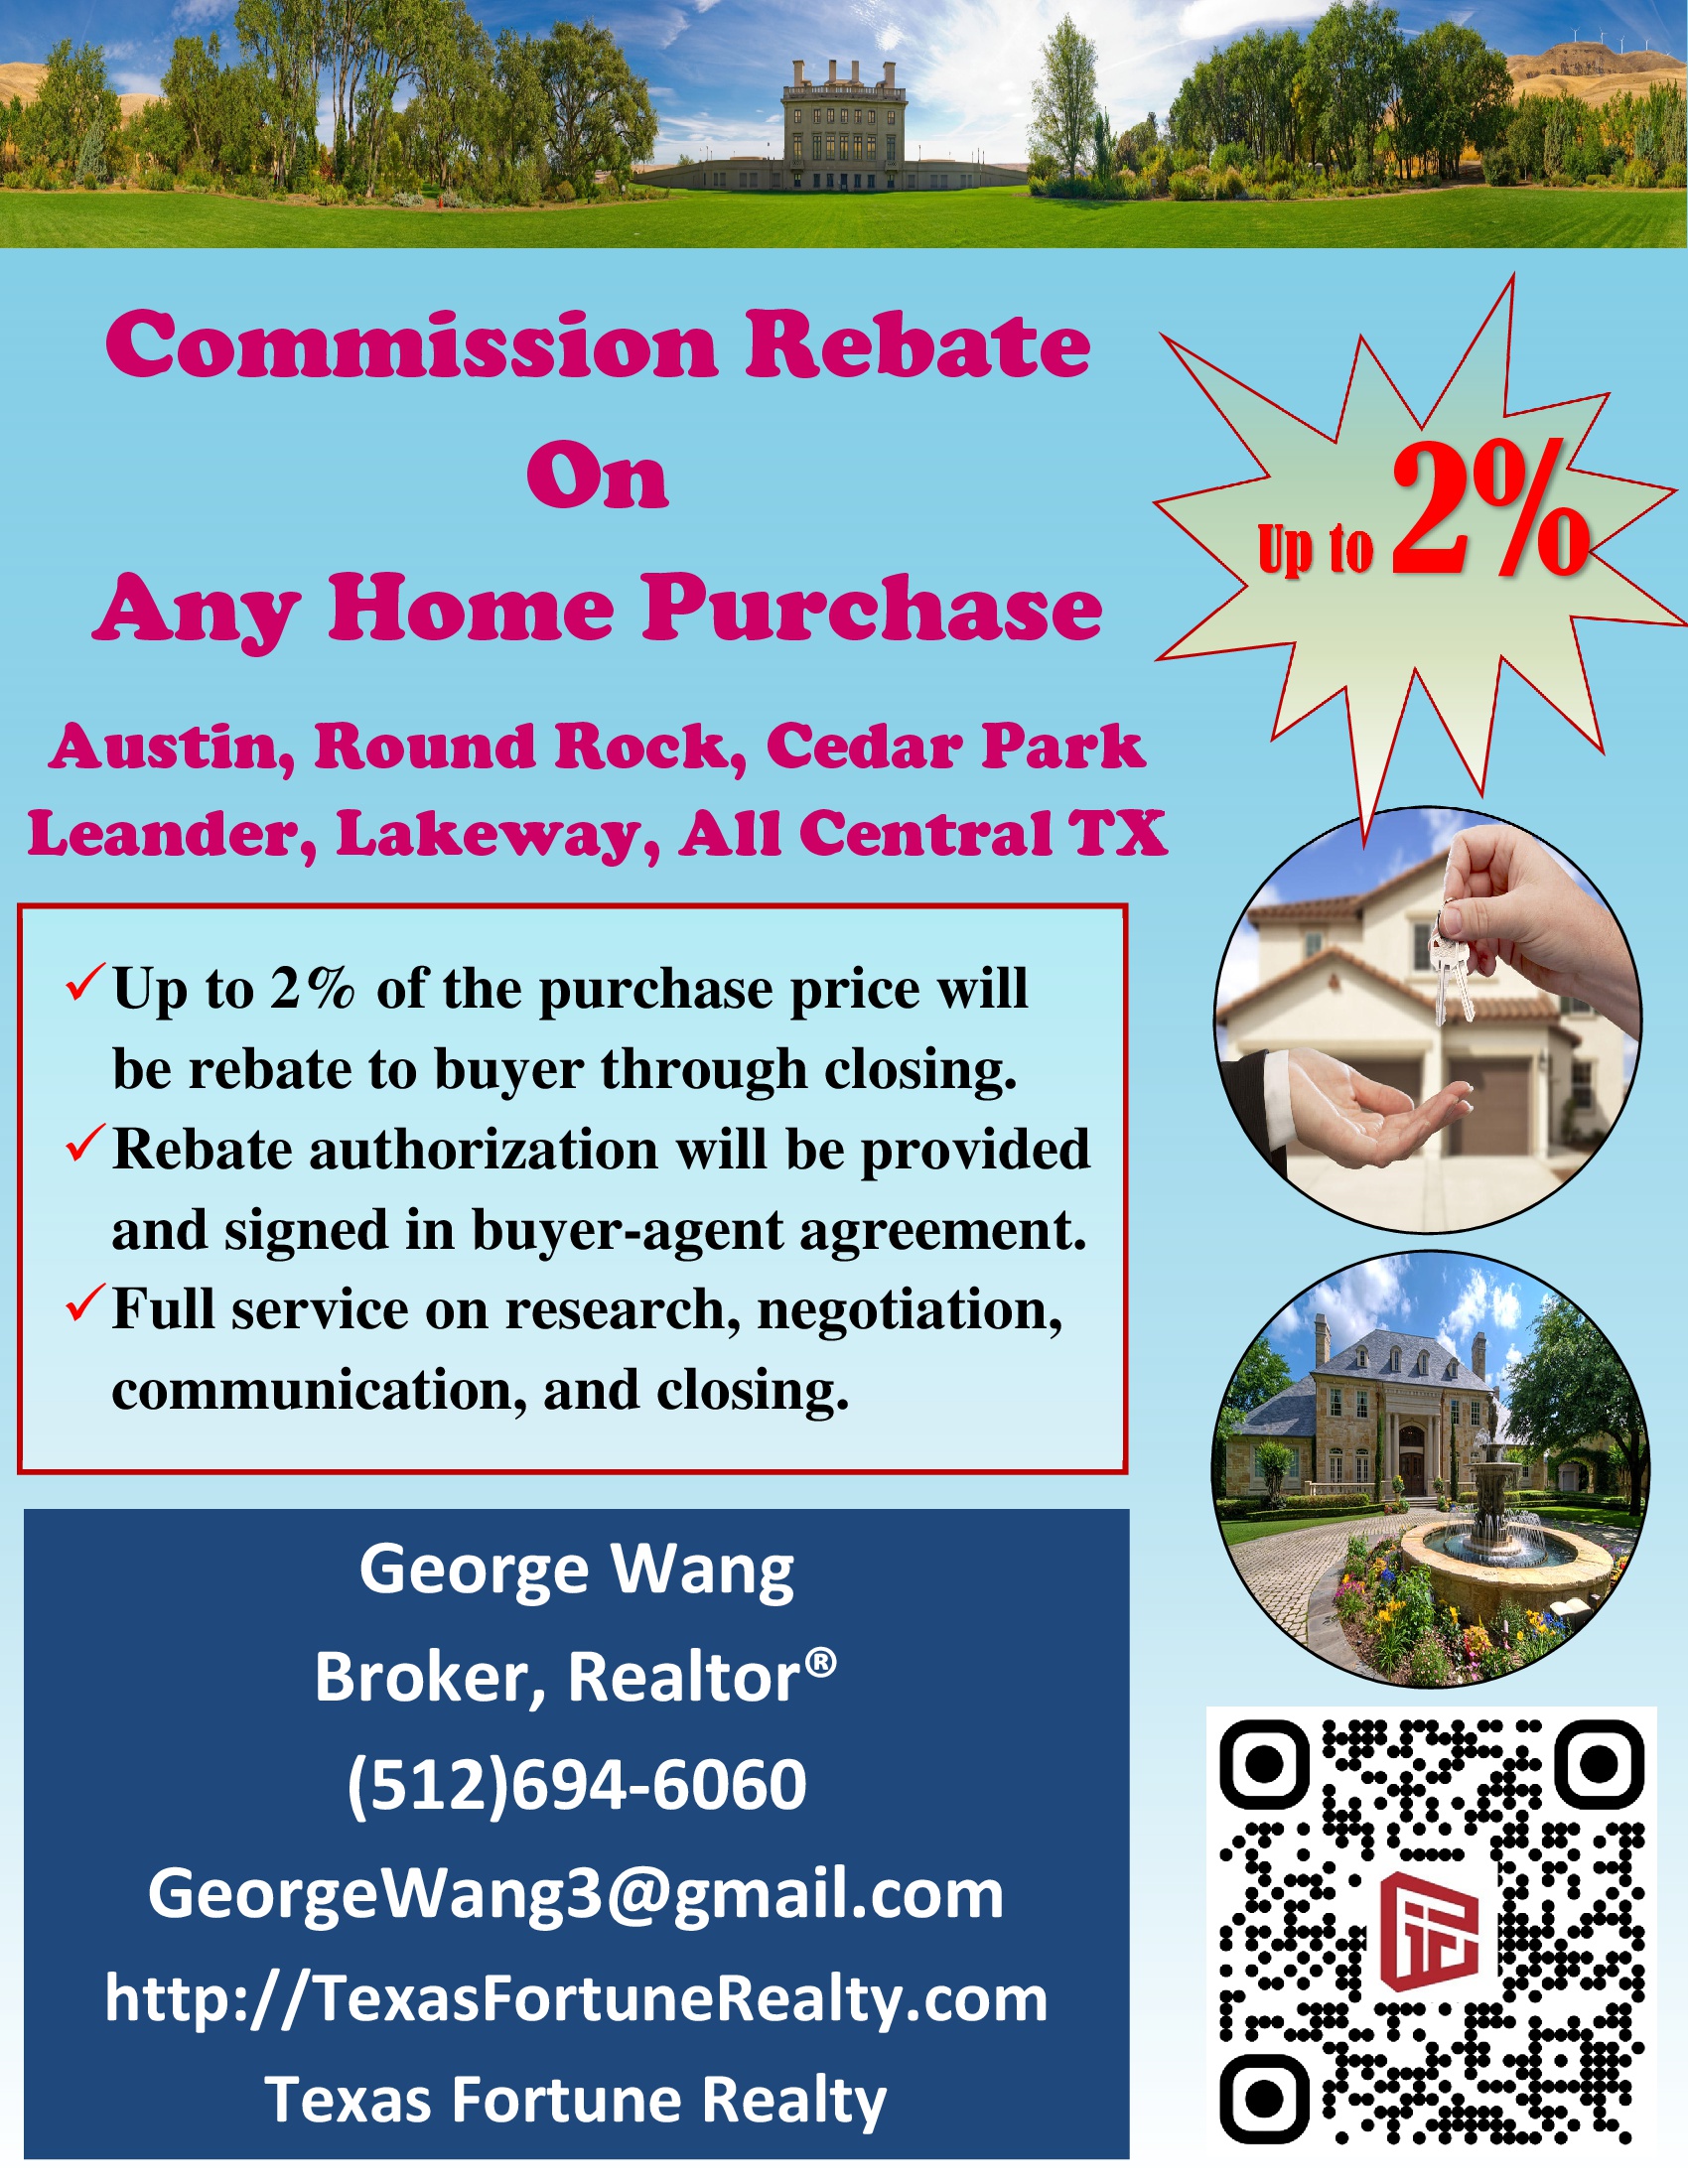 Buyer Commission Rebate Texas Fortune Realty